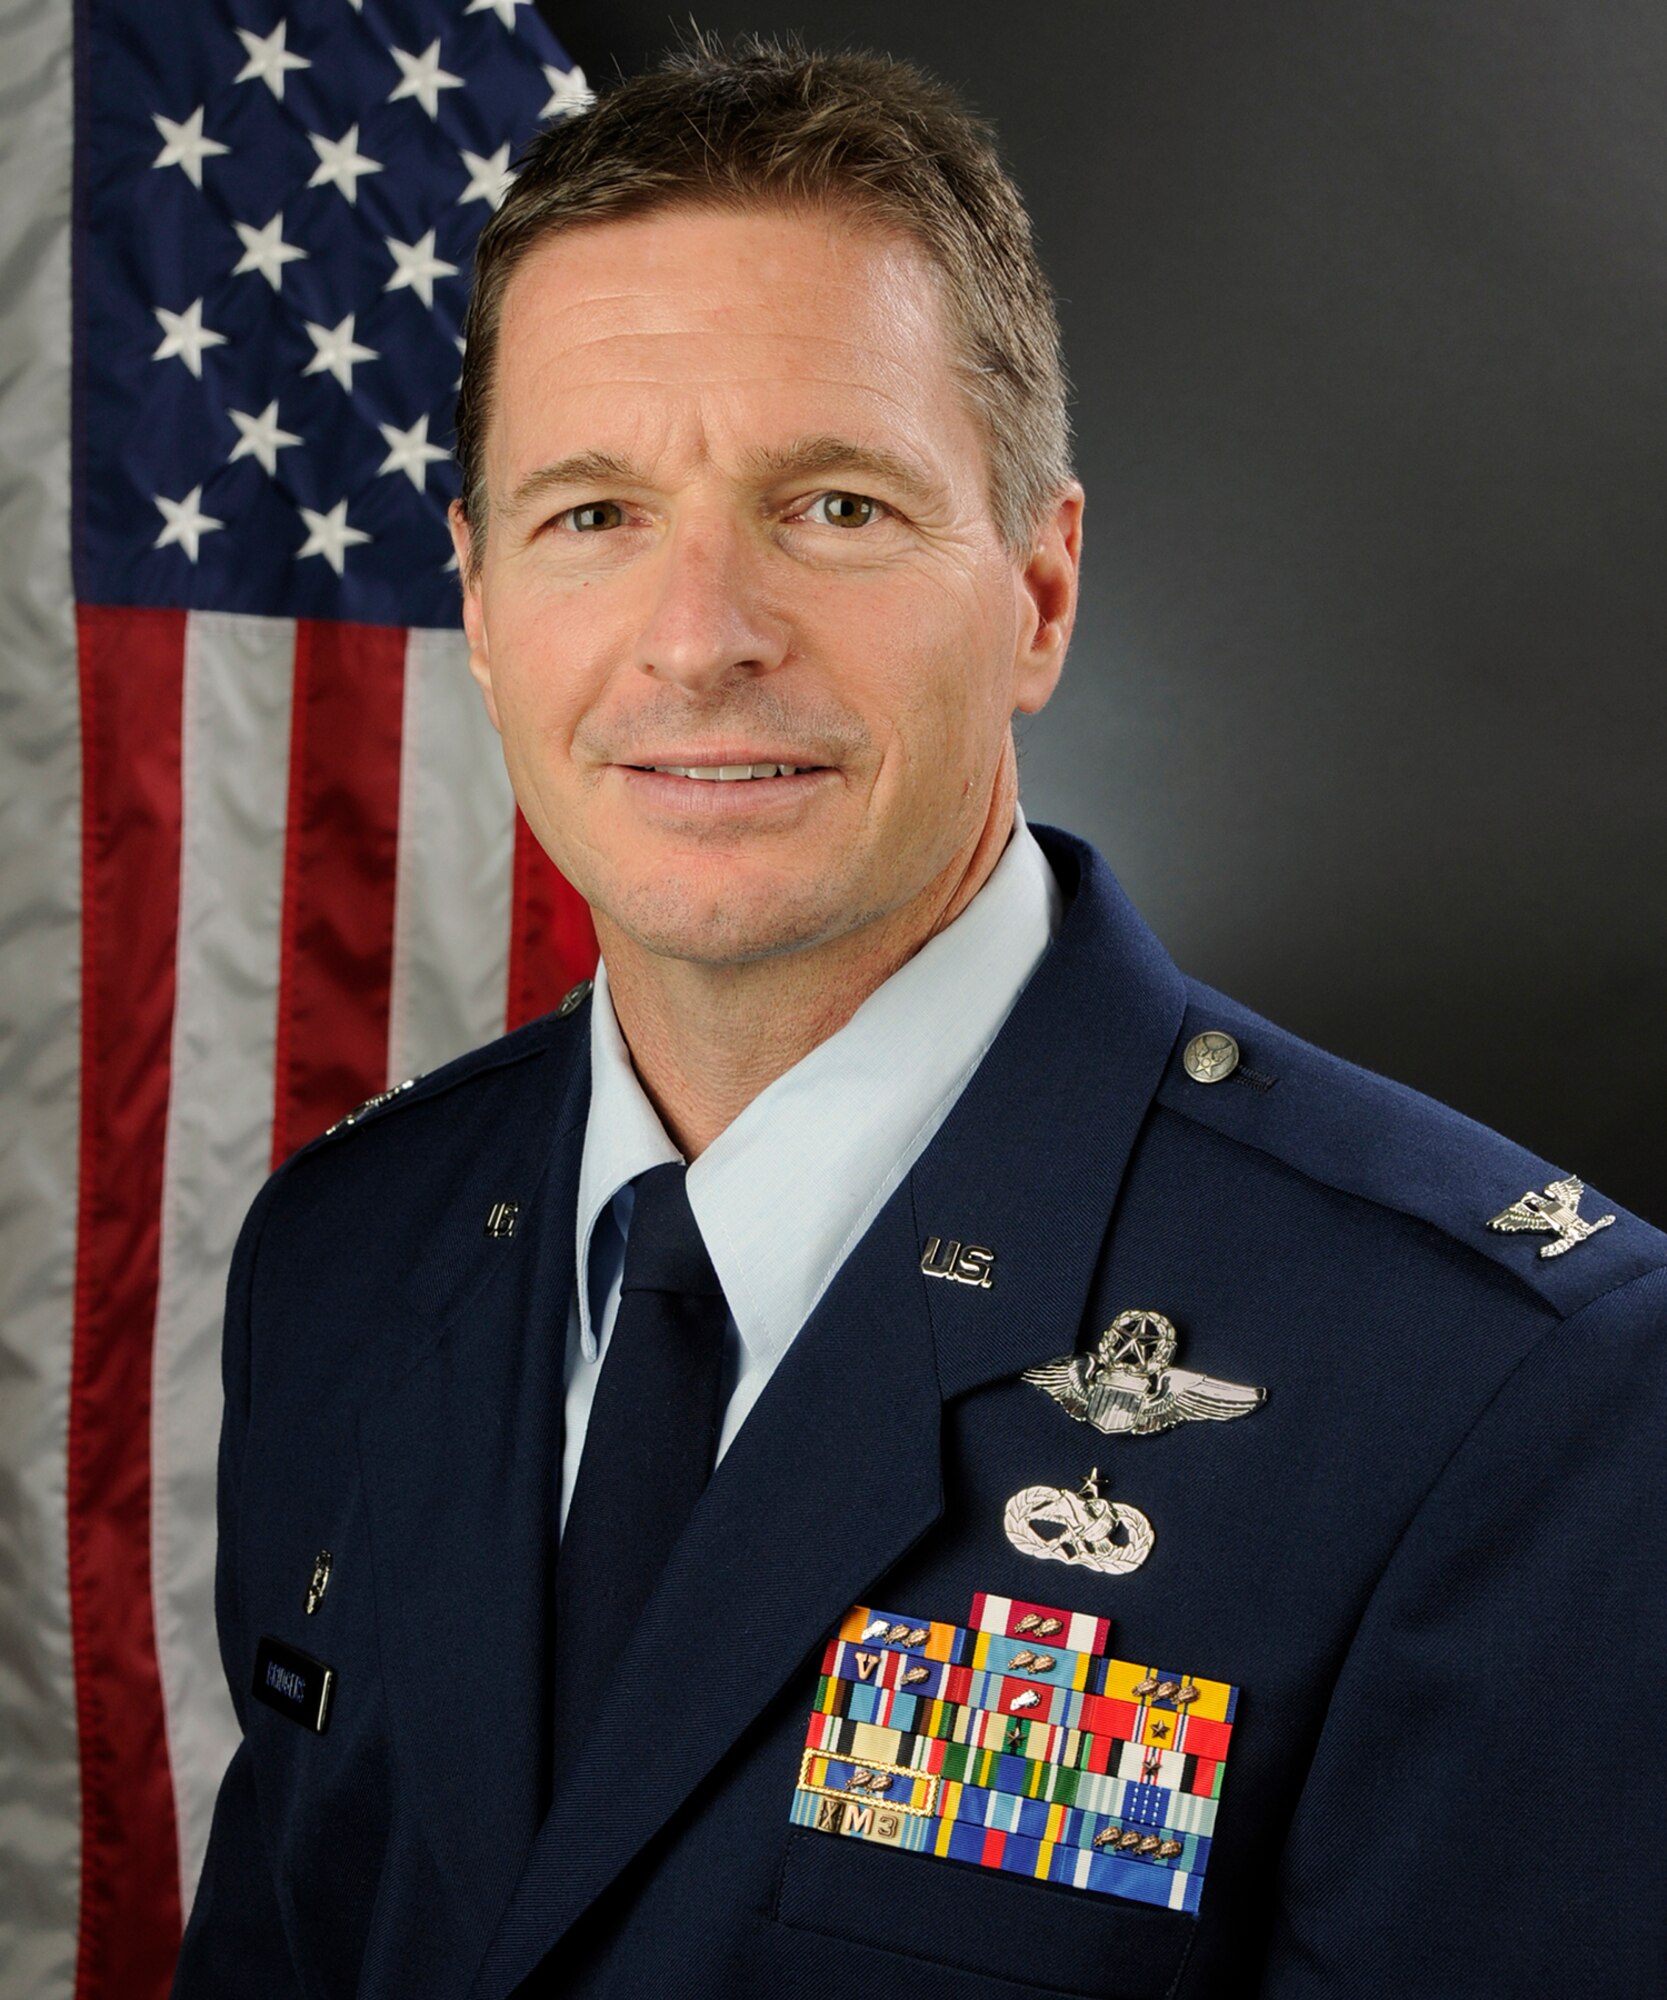 Portrait of U.S. Air Force Col. Scott Bridgers, commander of the 169th Maintenance Group at McEntire Joint National Guard Base, S.C., Oct. 28, 2016. (U.S. Air National Guard photo by Airman 1st Class Megan Floyd)